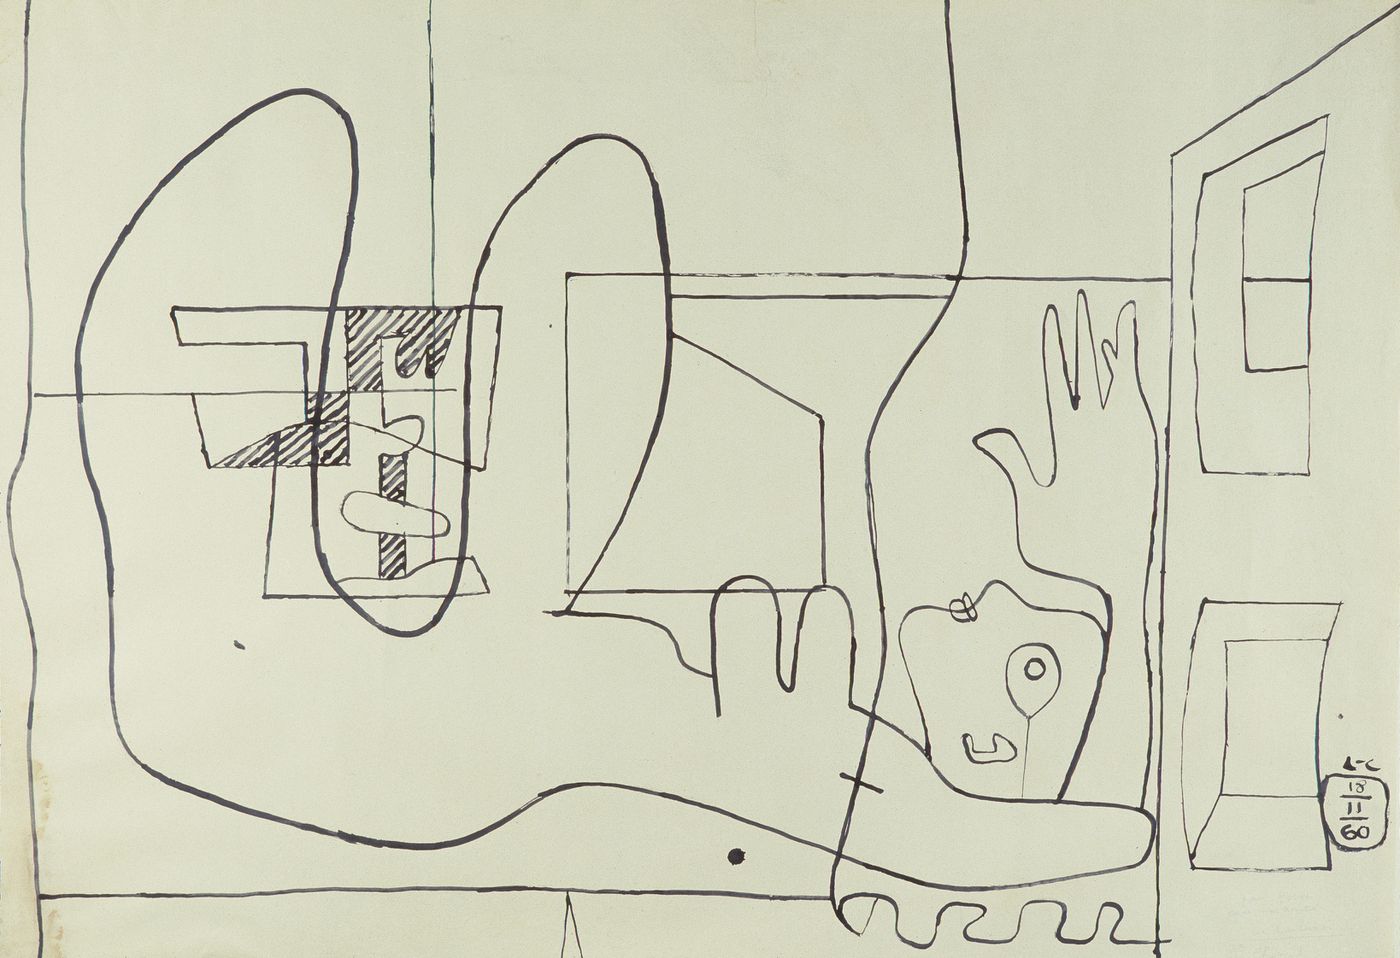 Photograph of a drawing by Le Corbusier